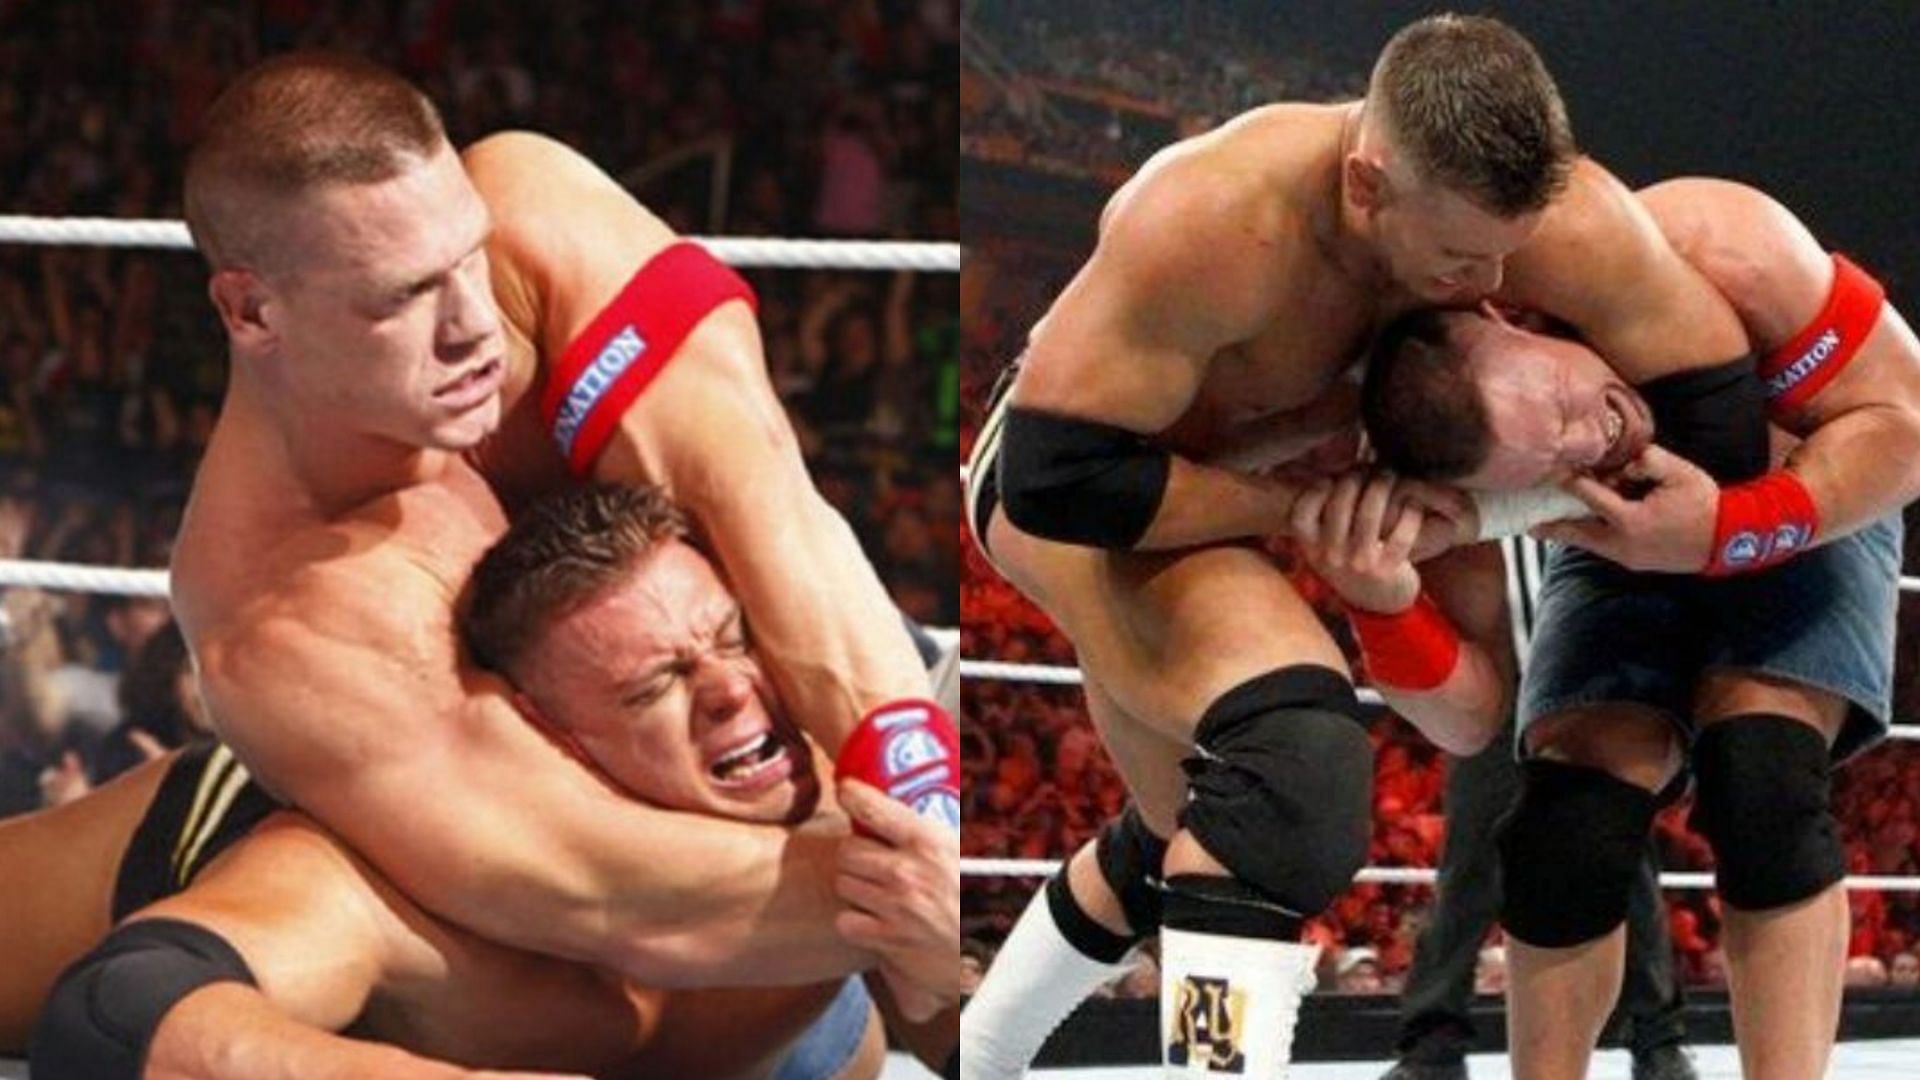 John Cena and Alex Riley disliked each other